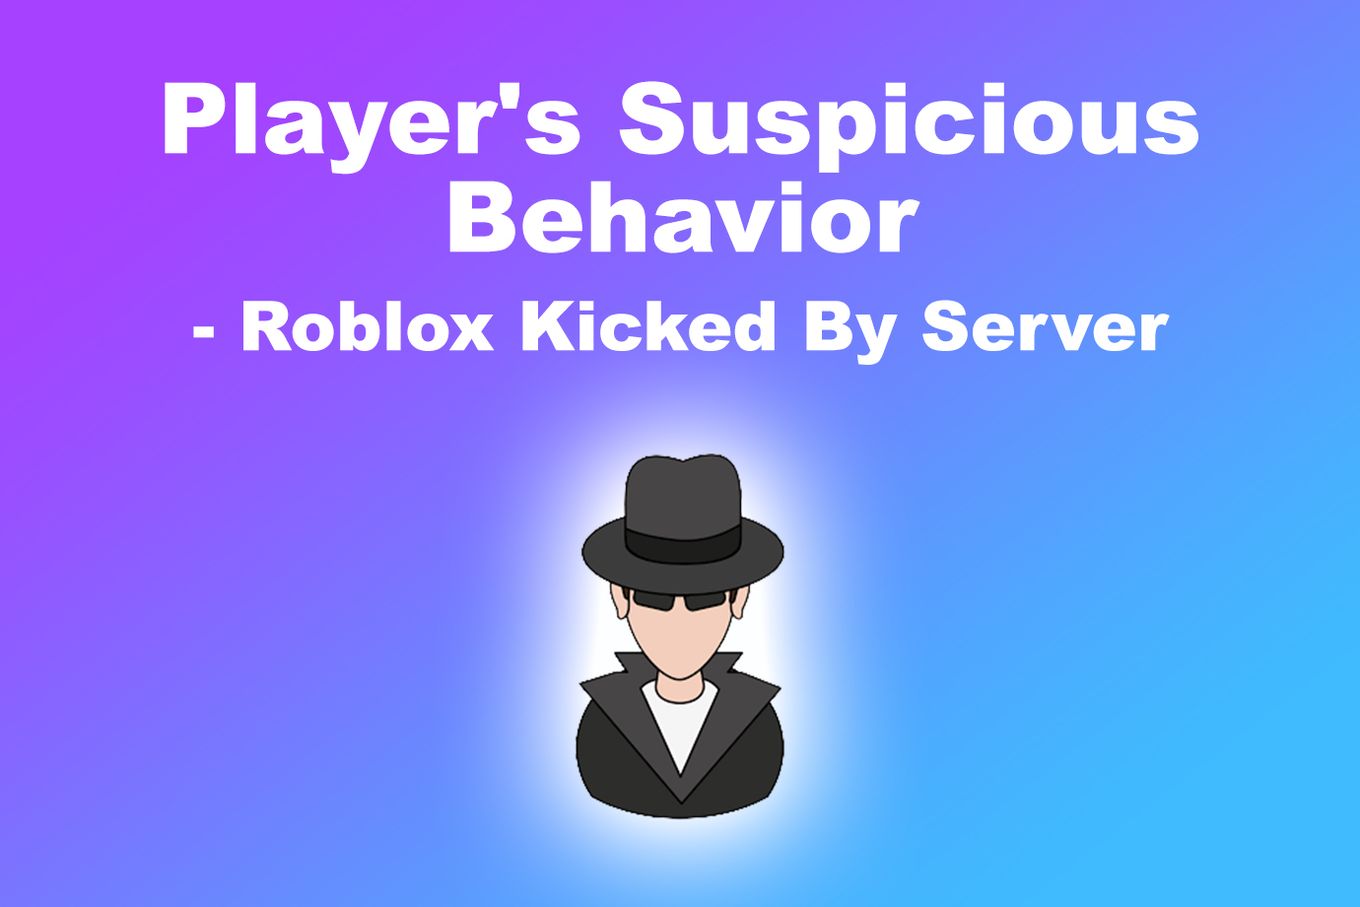 I got kicked while playing a Roblox game and now I can't play any